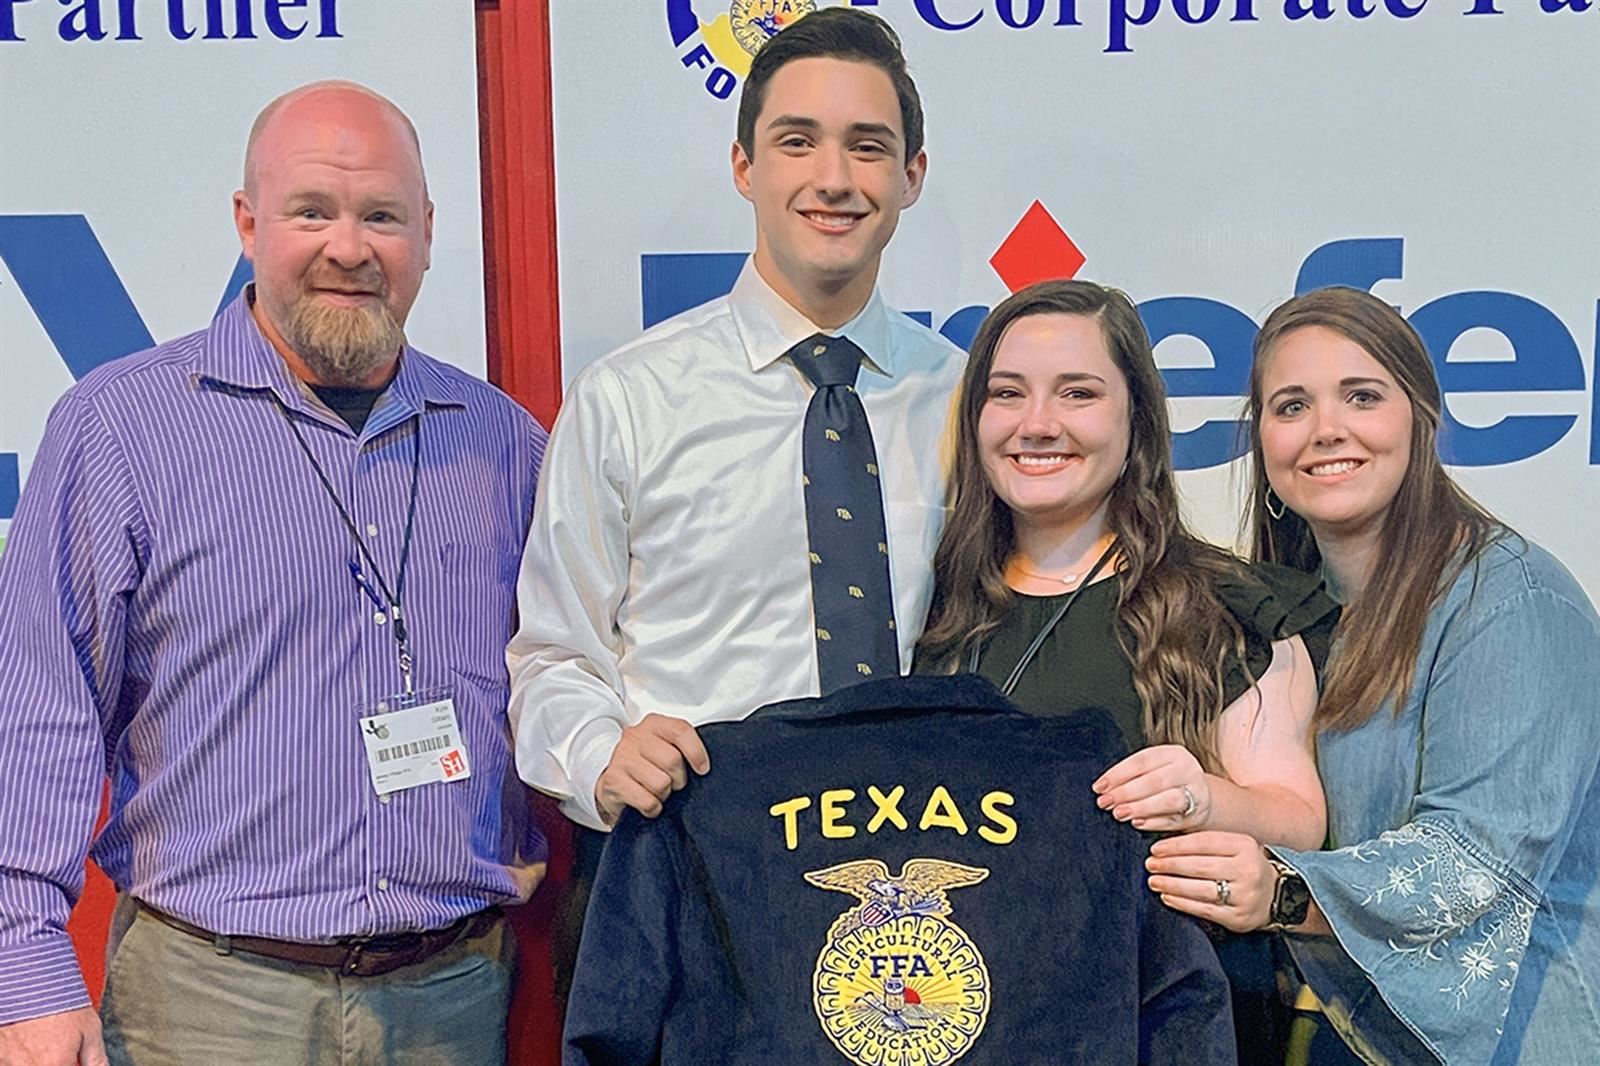 Jersey Village HS graduate to serve as Texas FFA state officer.